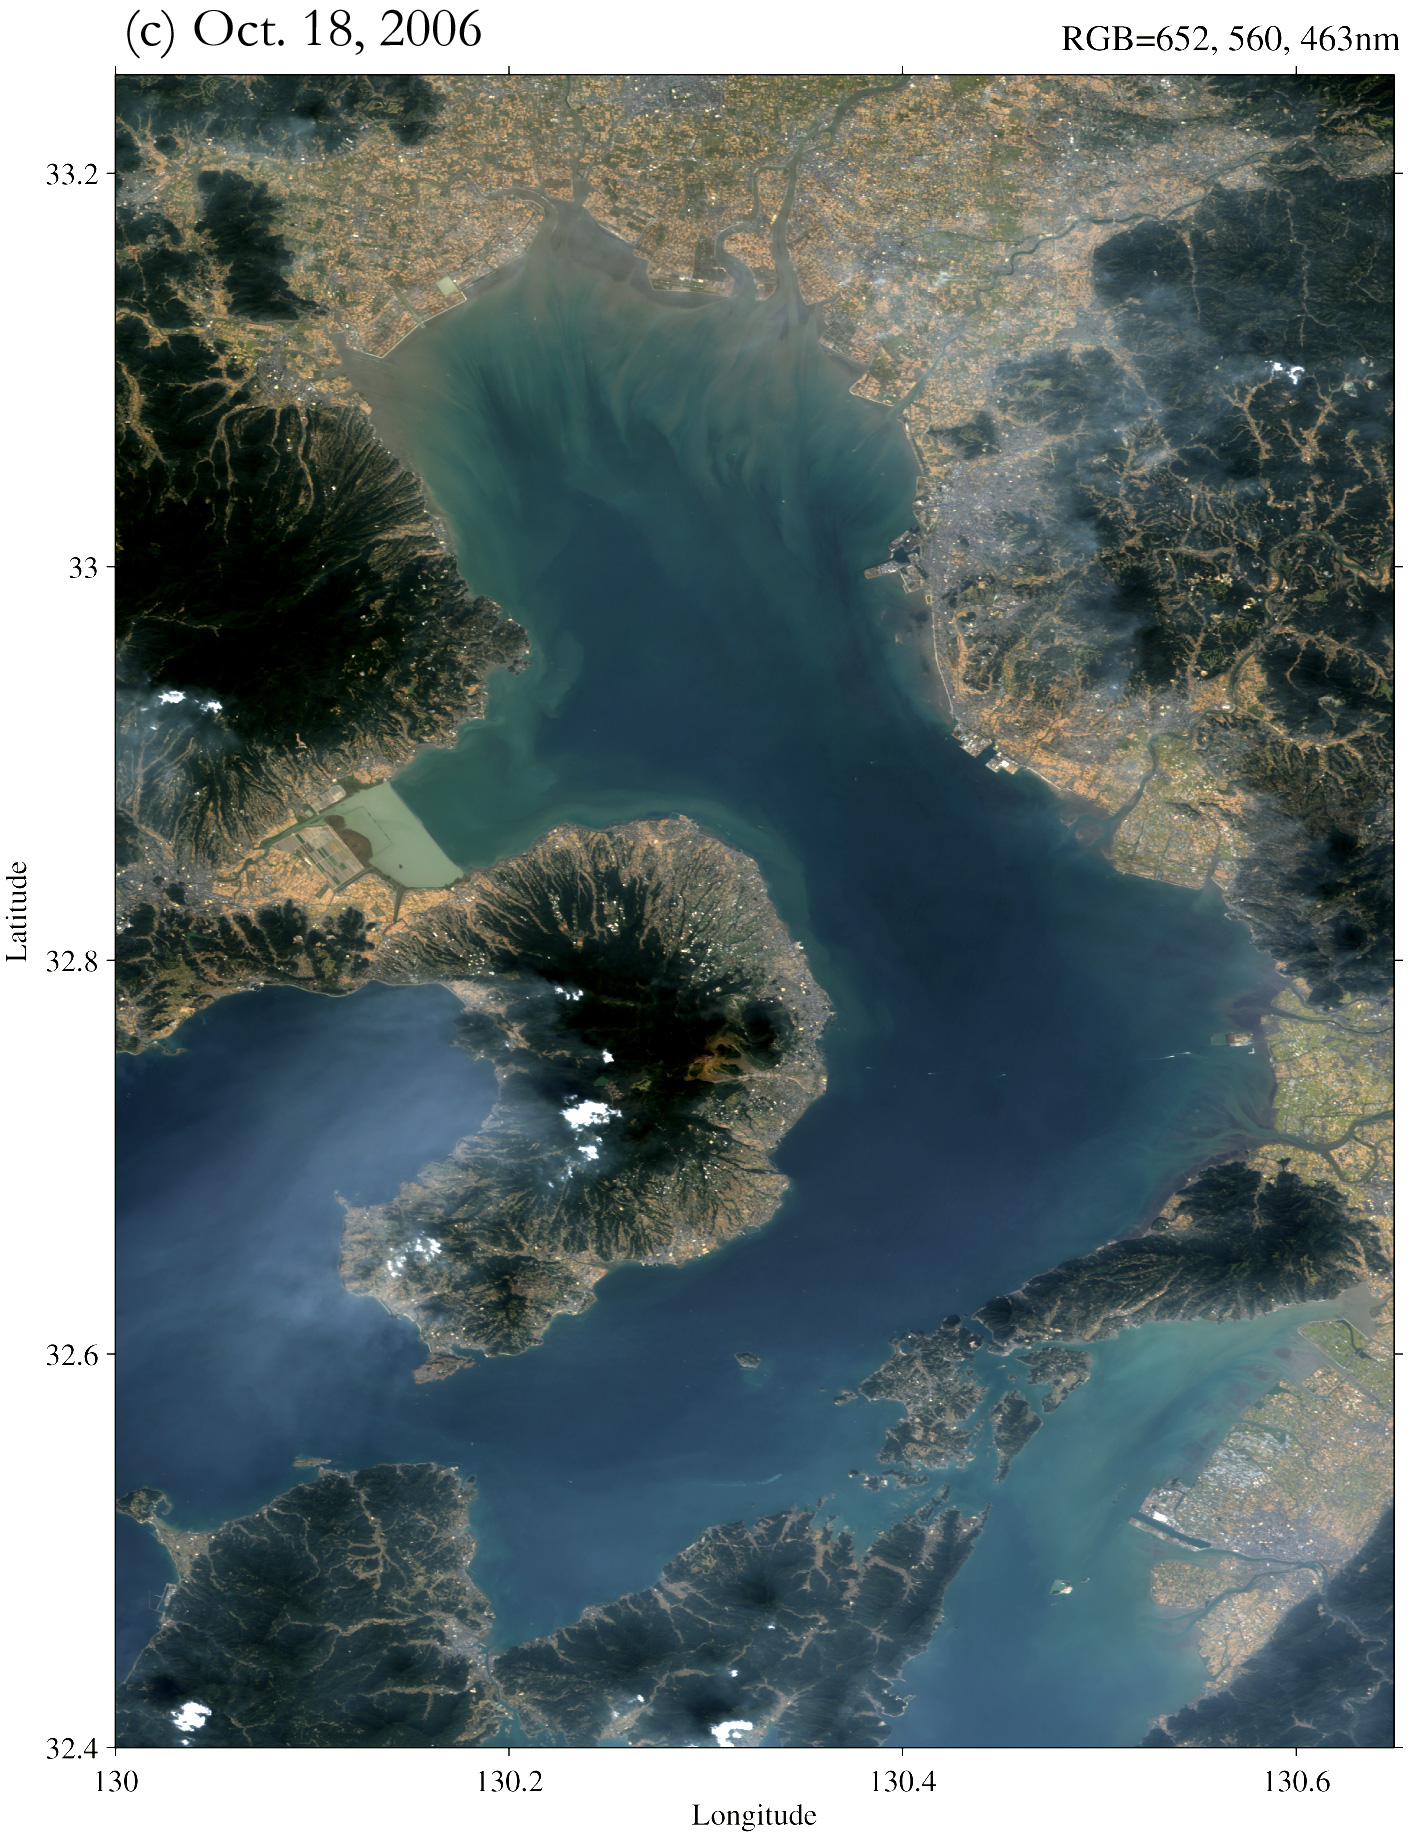 Fig.1: RGB images of the Ariake Sea on Oct. 18 in 2006 by AVNIR-2